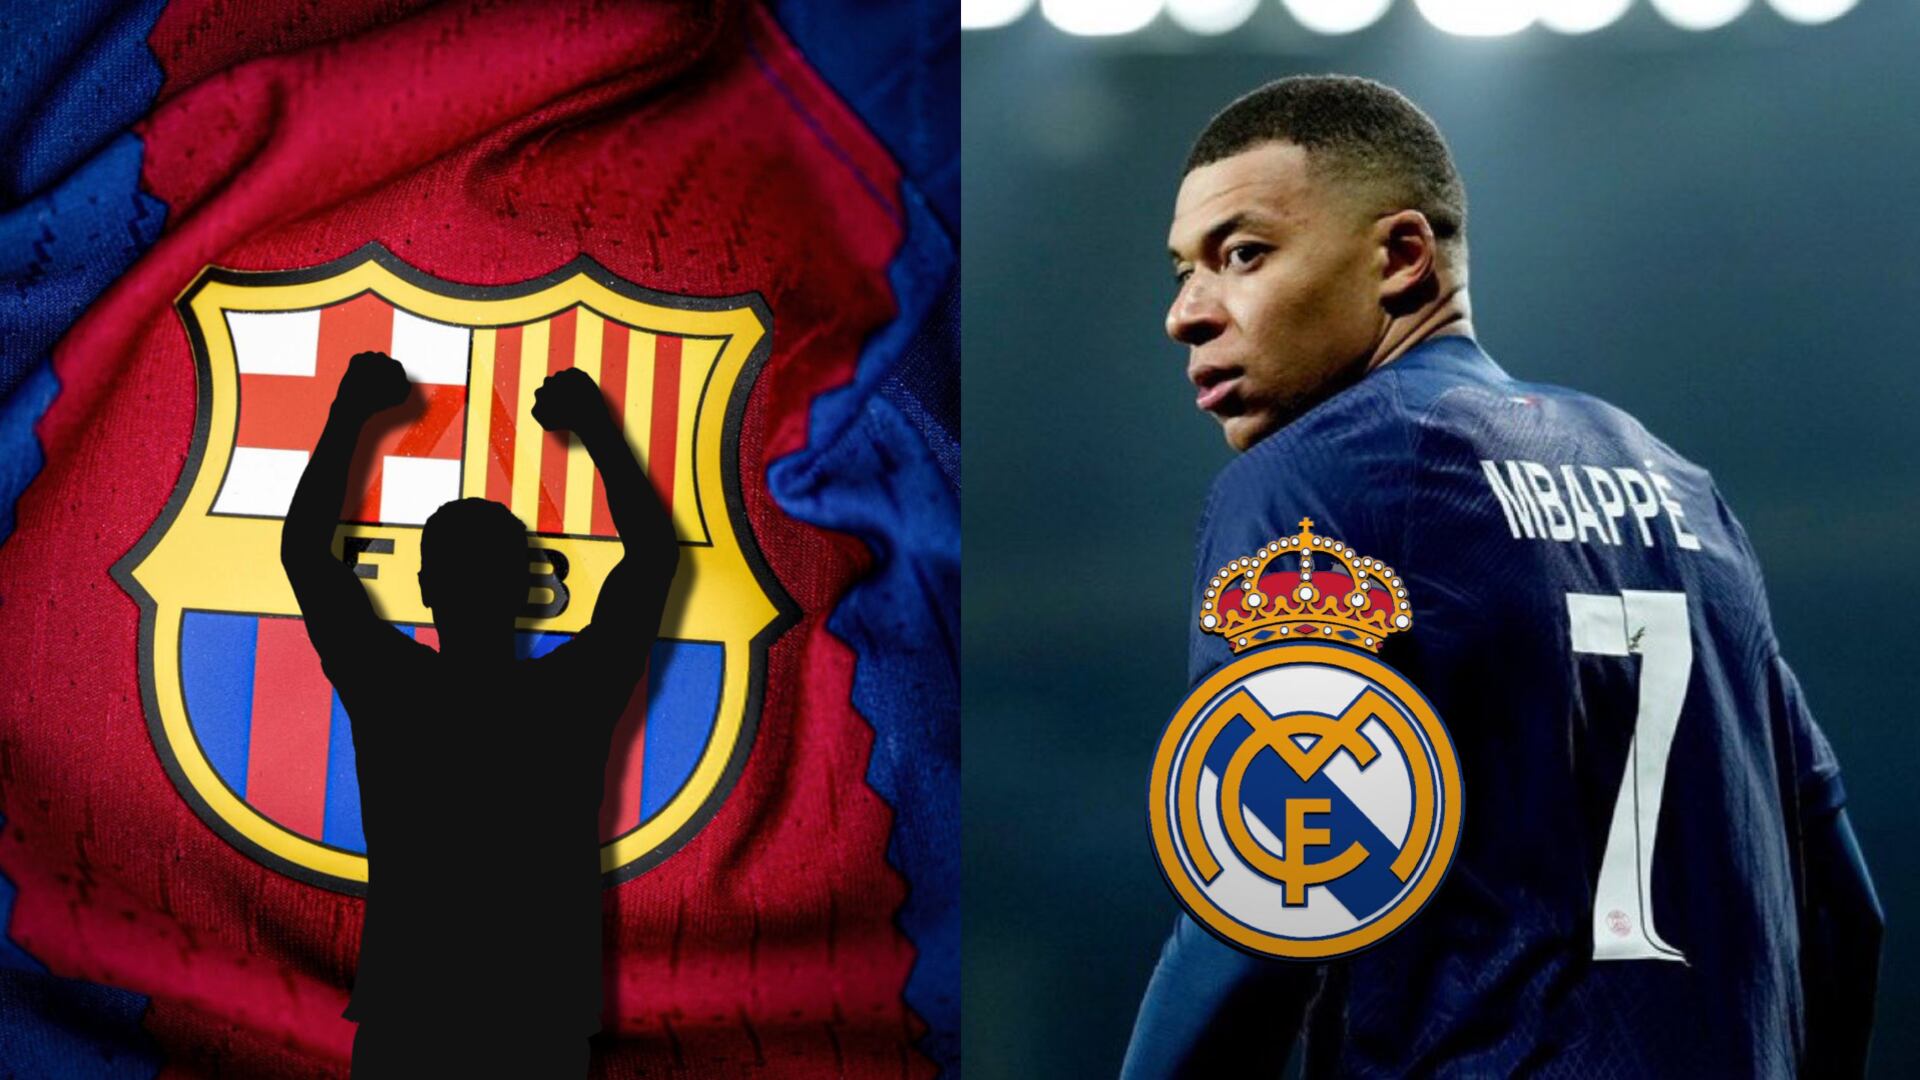 The FC Barcelona player that accidentally confirmed Mbappé joining Real Madrid?